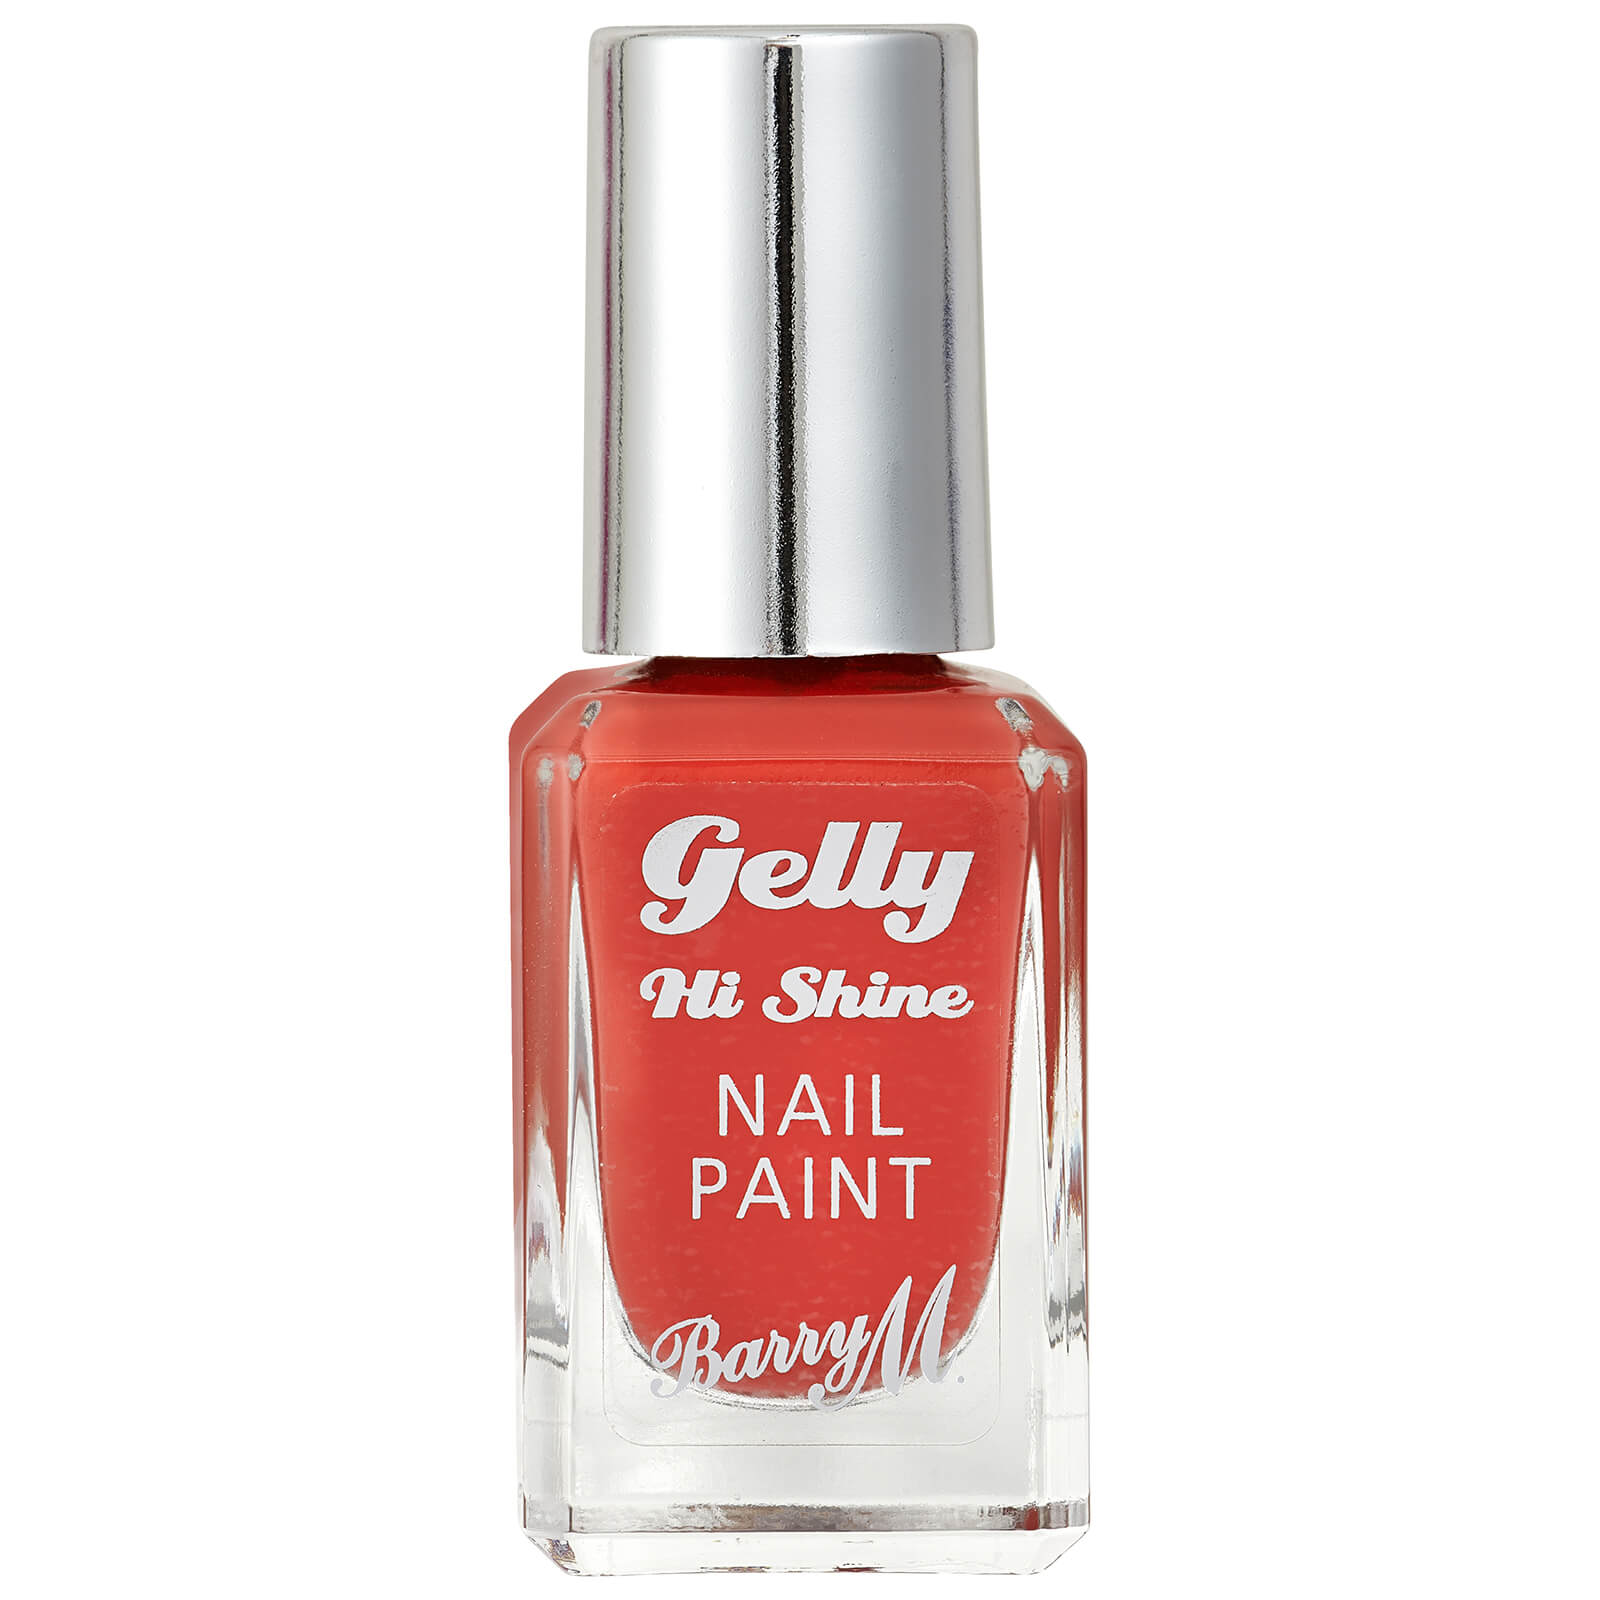 Barry M Cosmetics Gelly Hi Shine Nail Paint 10ml (Various Shades) - Ginger